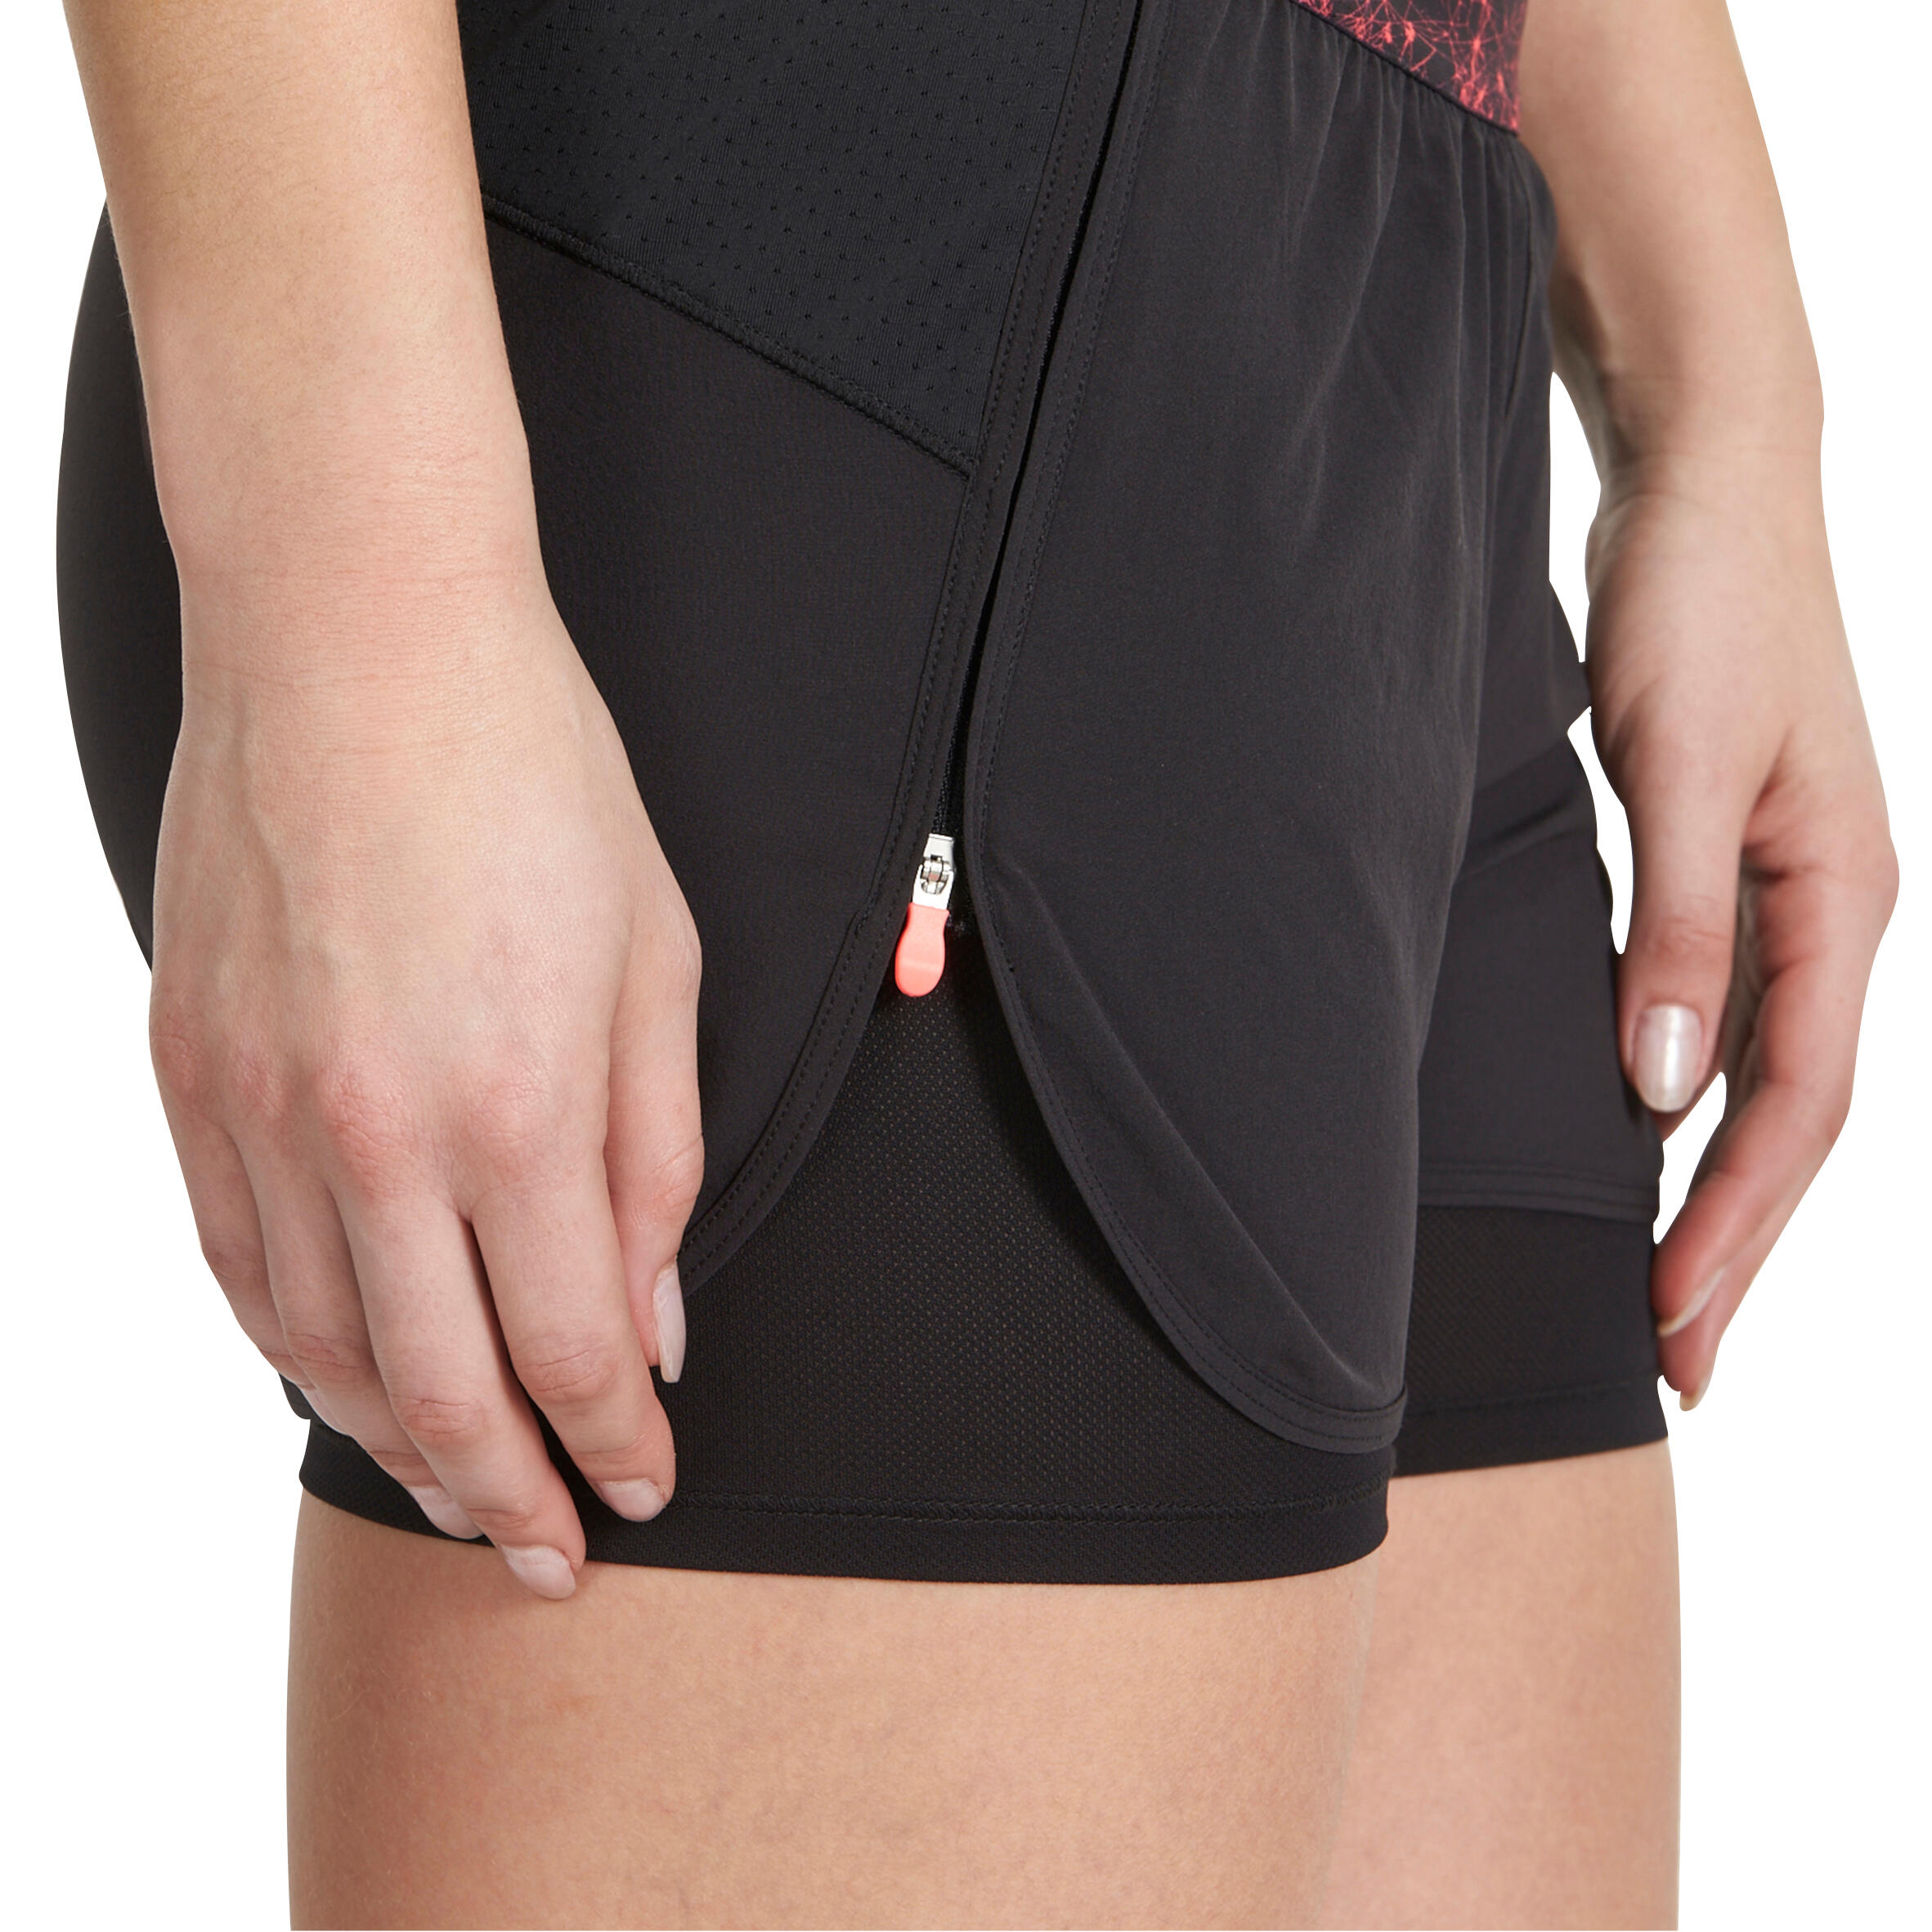 Energy Xtreme Women's 2-in-1 Fitness Shorts - Black/Printed Waistband 8/13